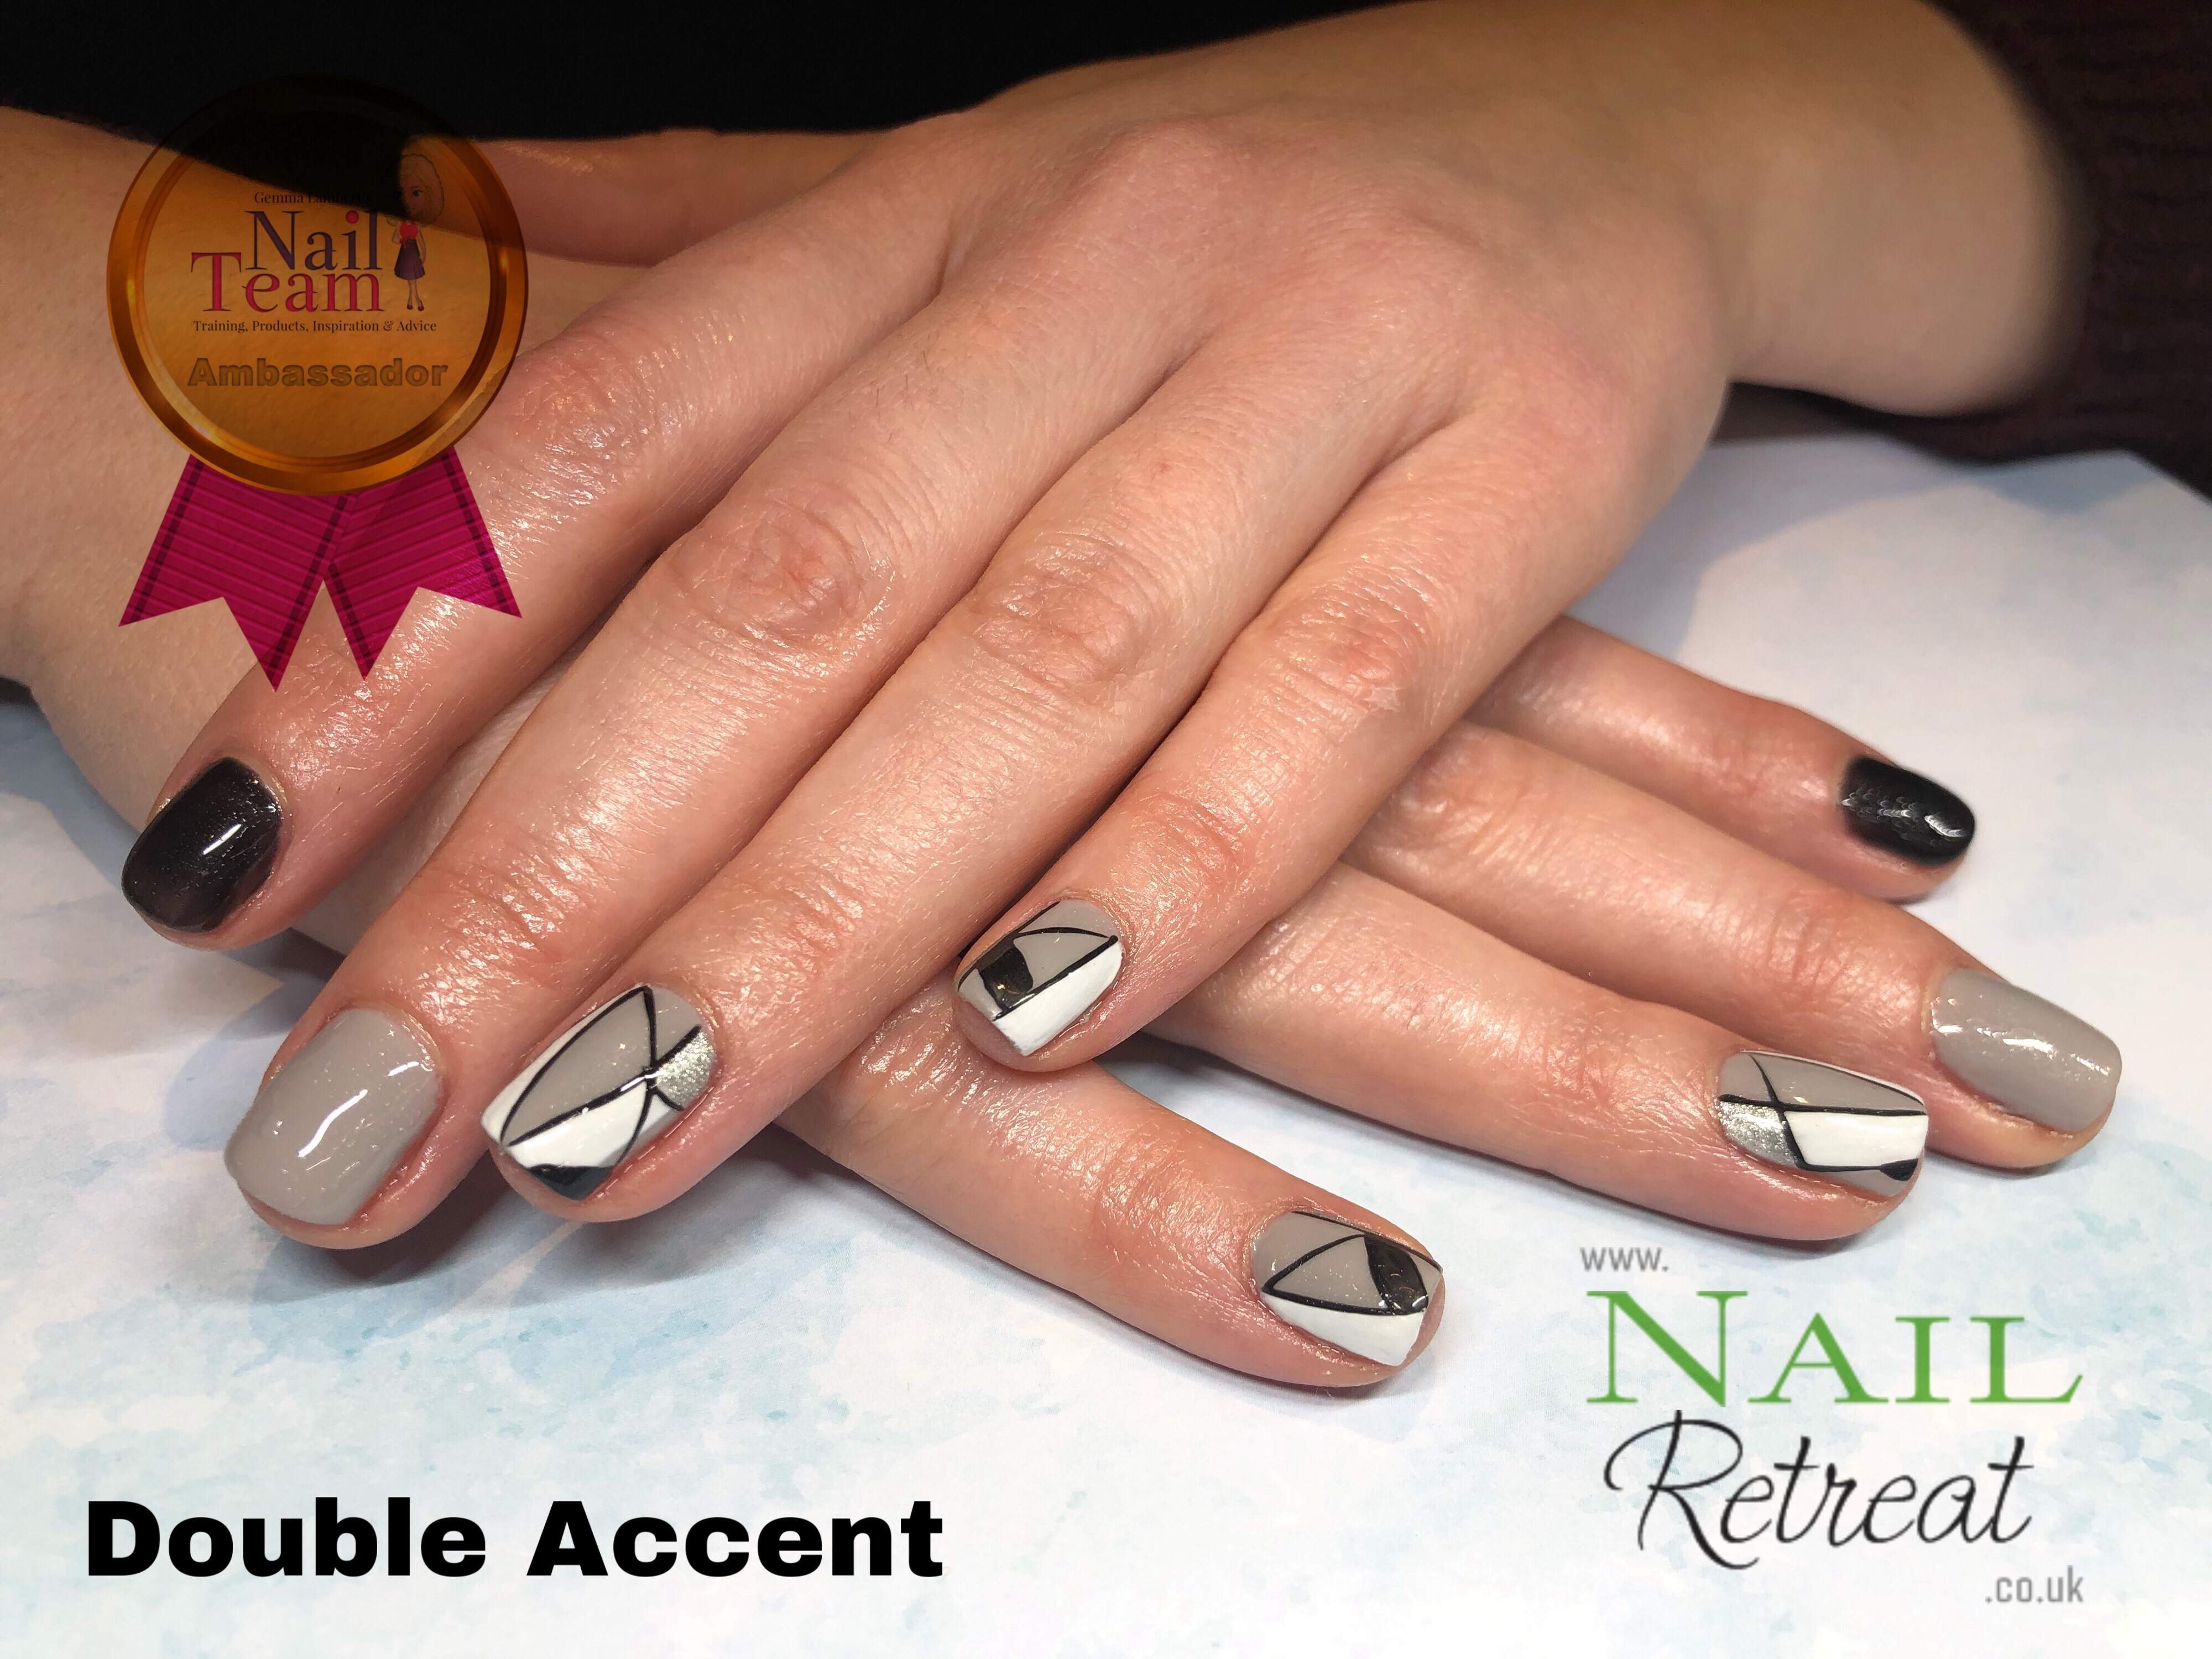 6. The Nail Retreat - wide 10